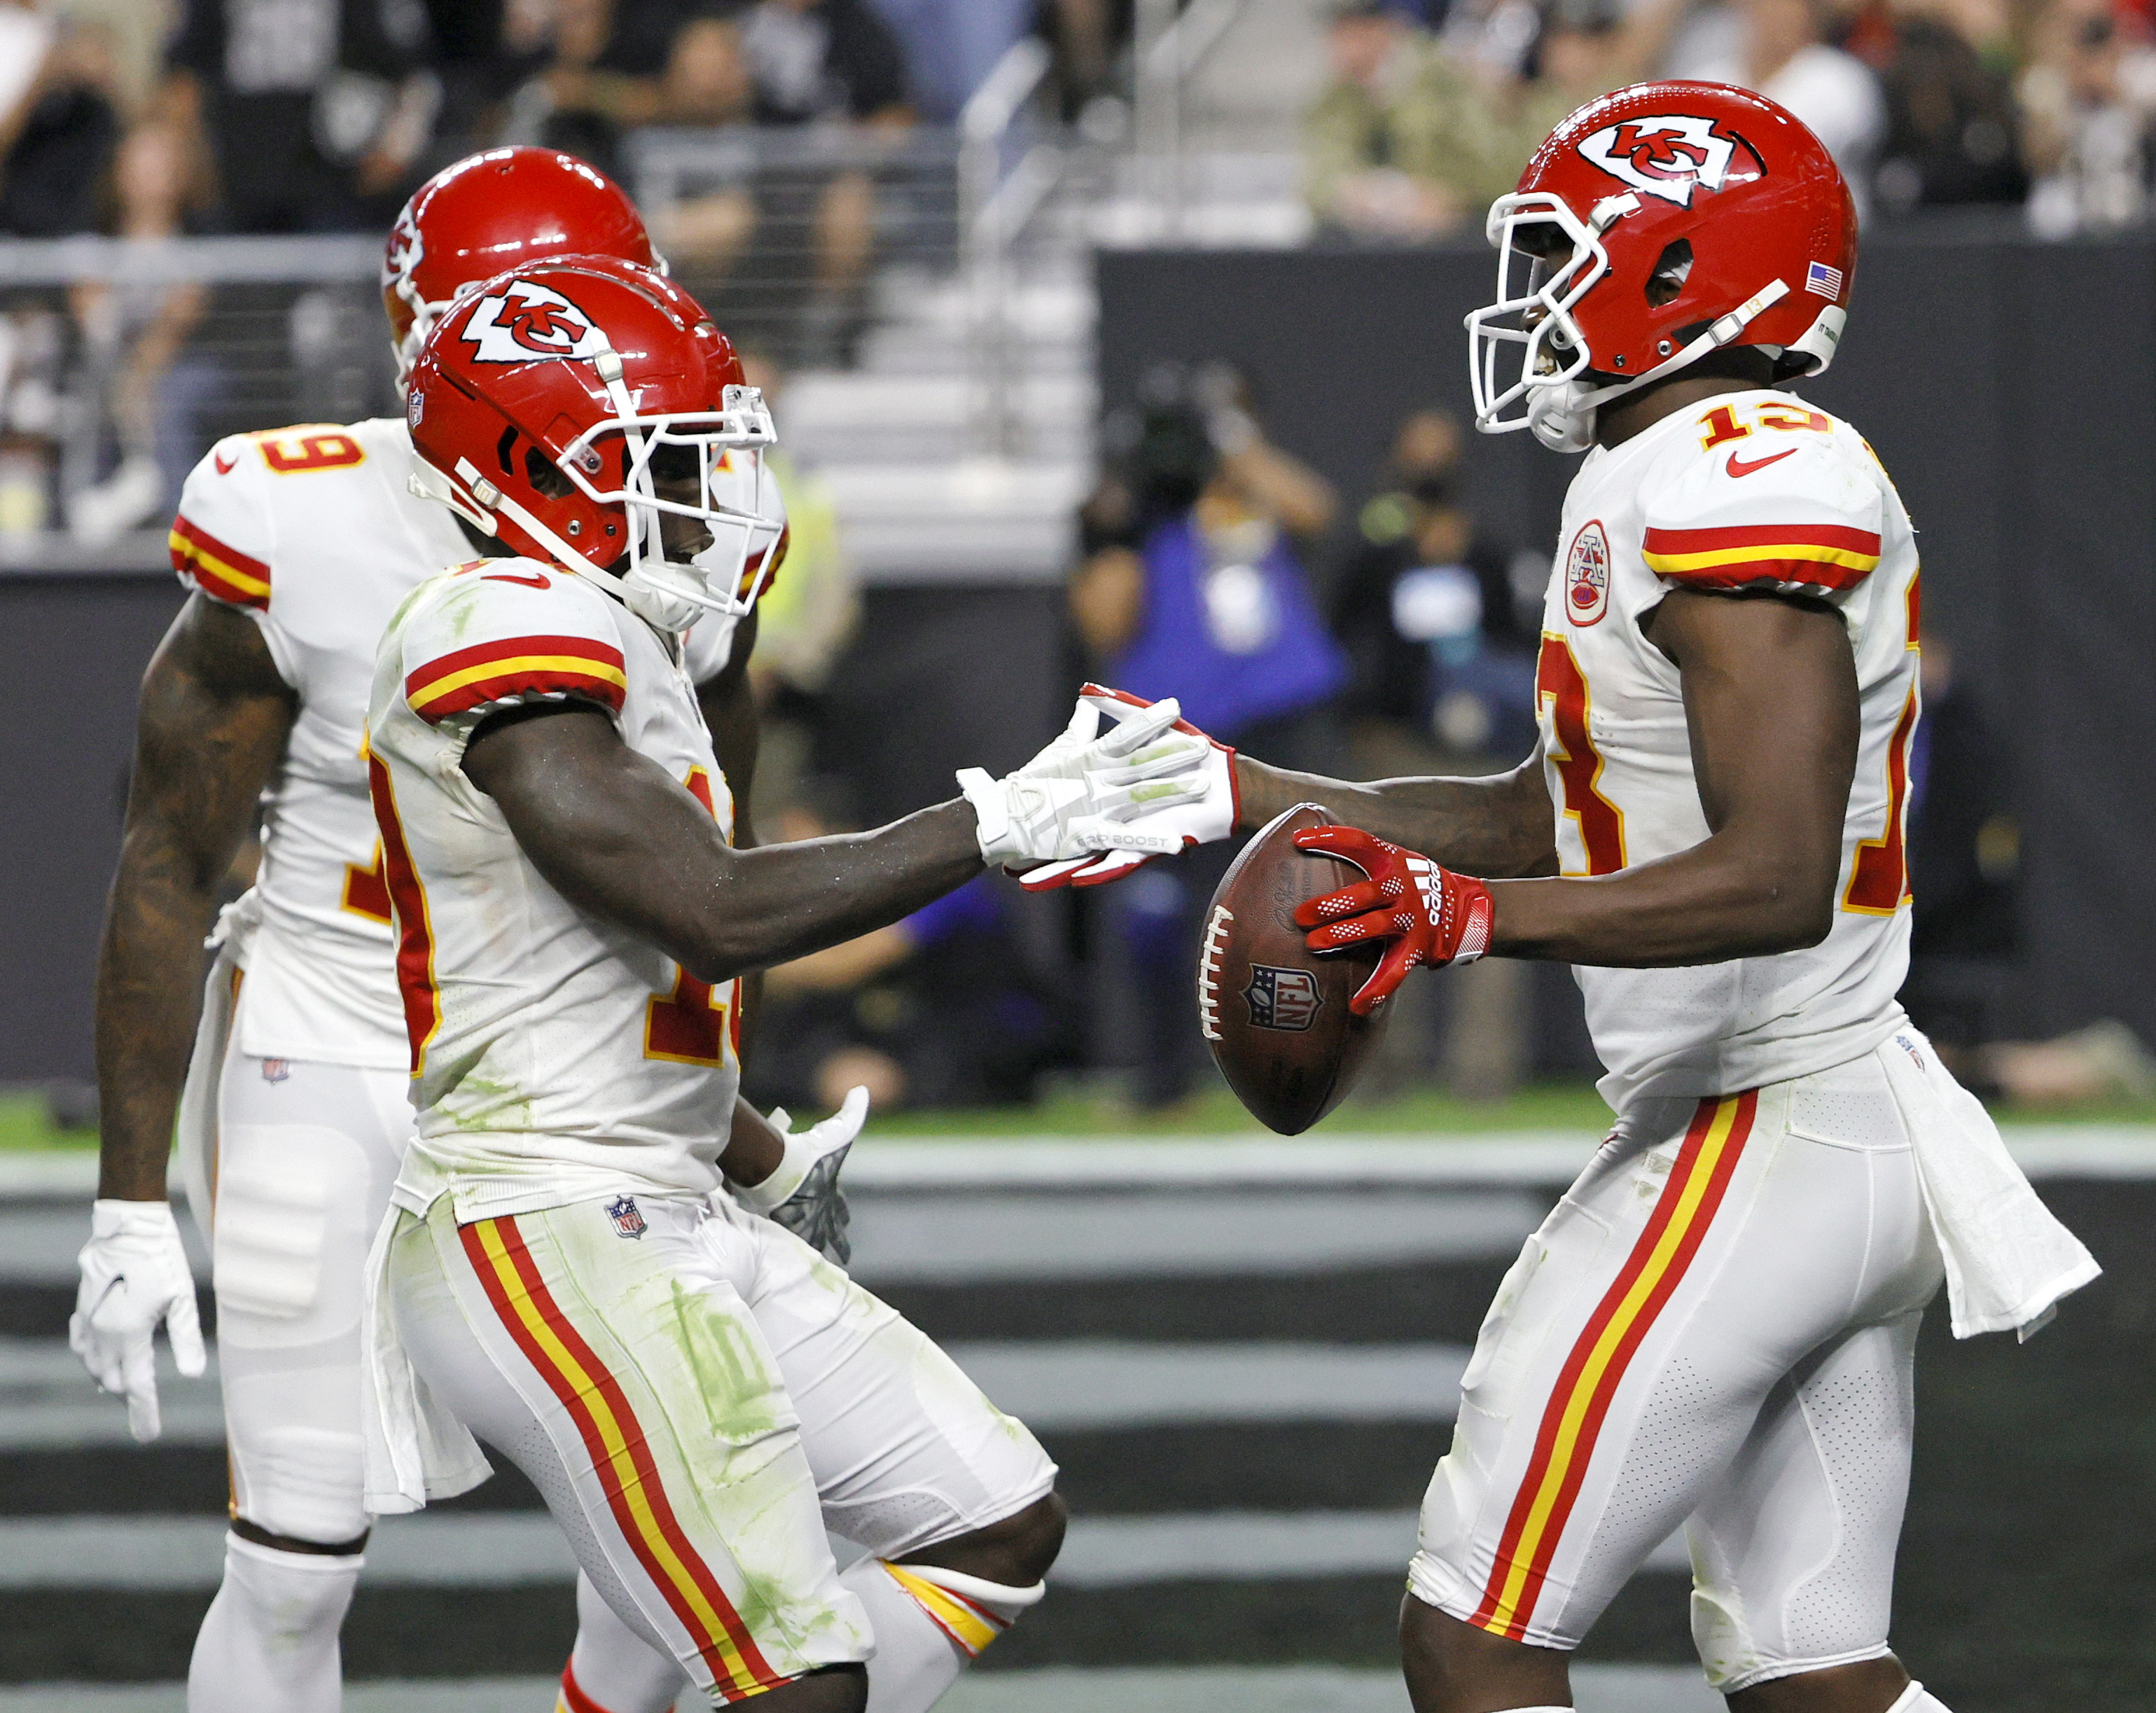 NFL Week 10: Here come the Chiefs in the AFC playoff race - The